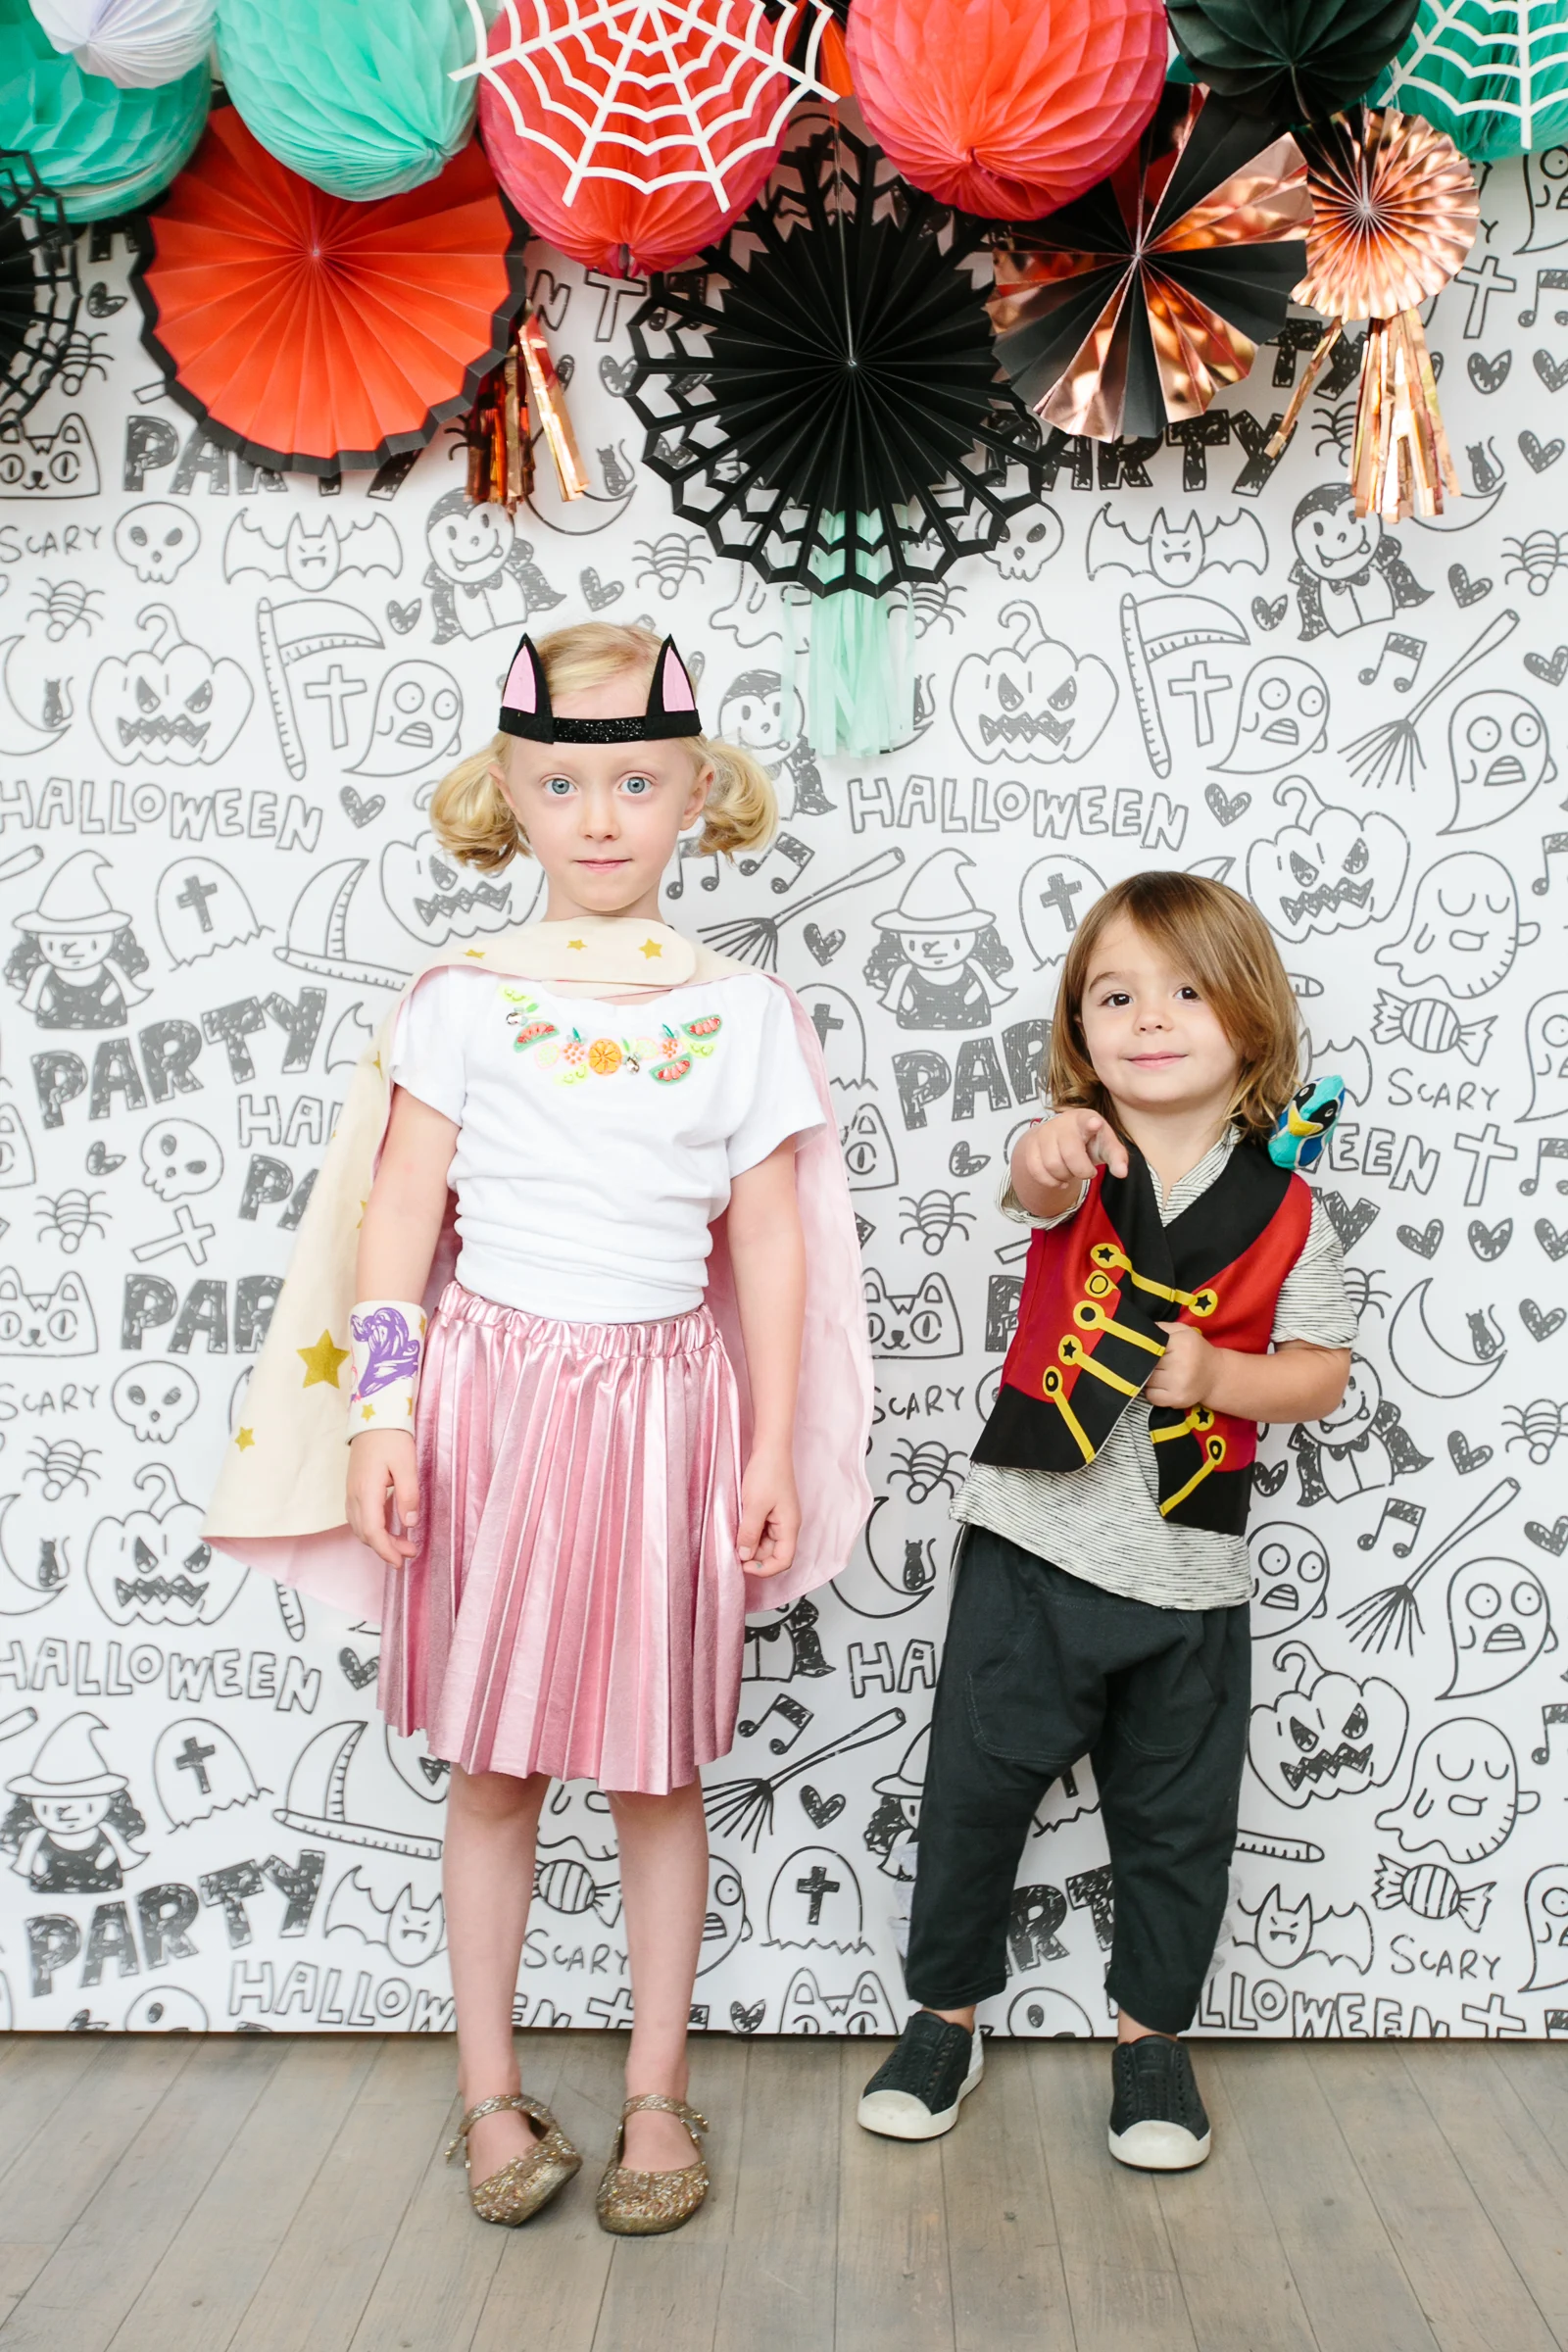 How to Craft a Boo-tiful Halloween Photo Backdrop - Project Nursery